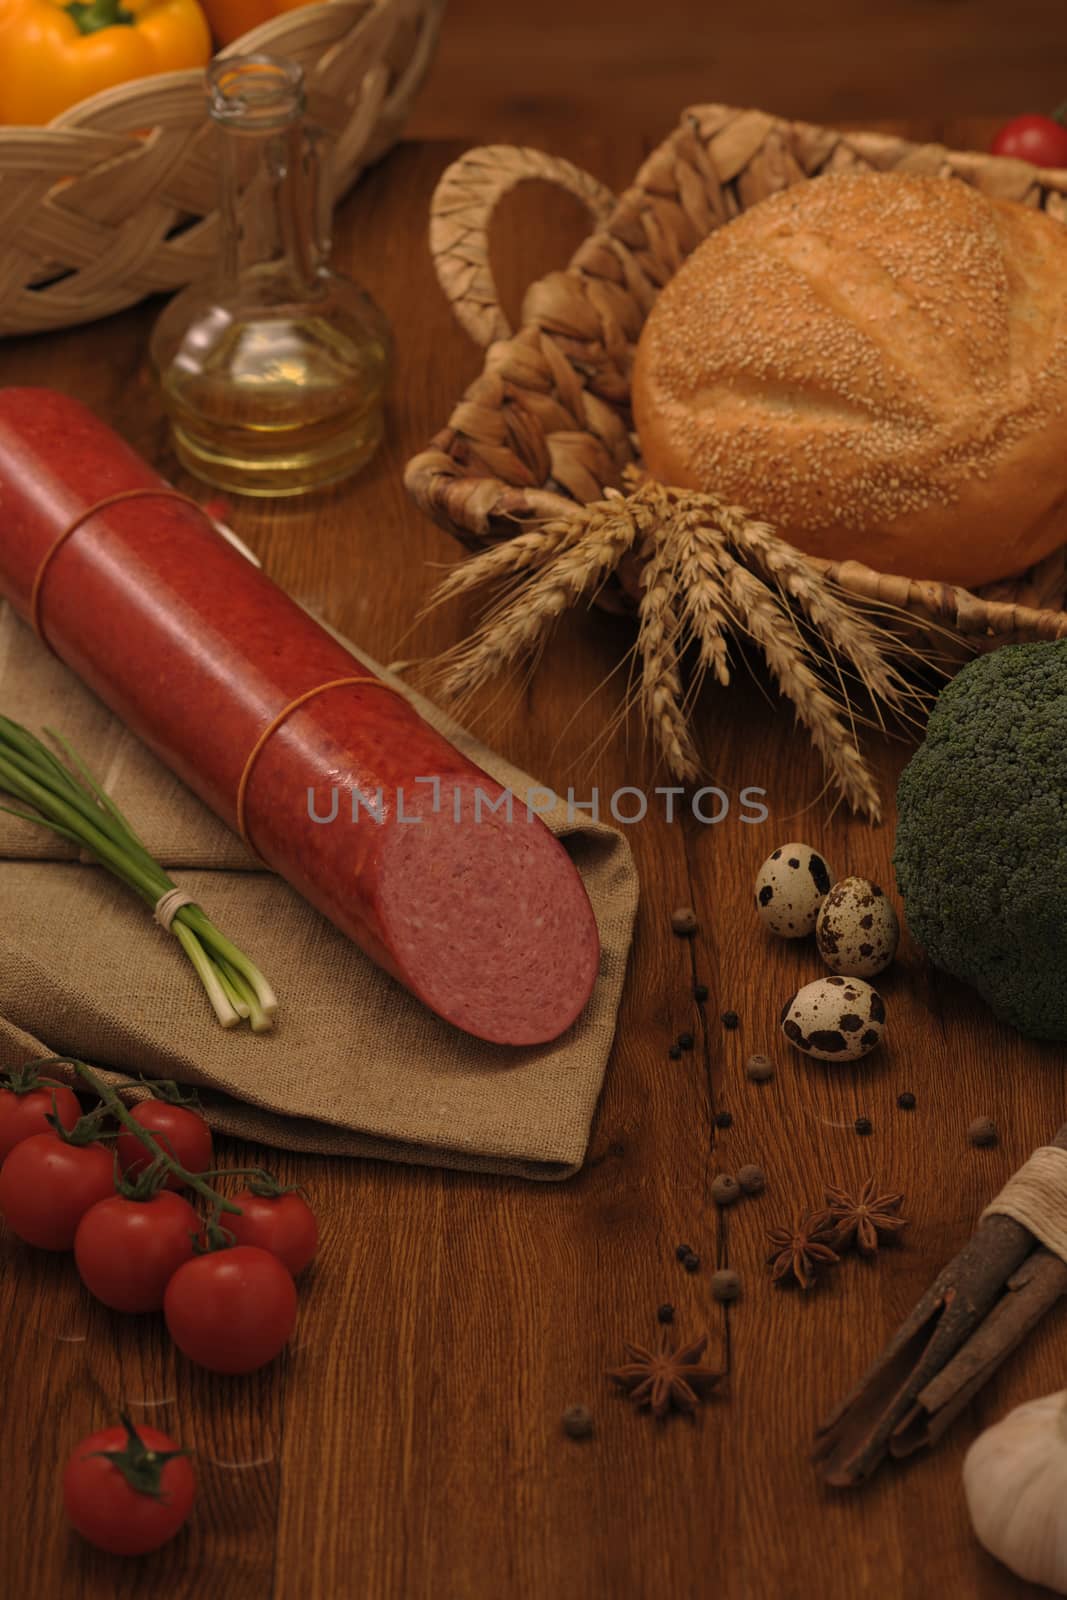 sausage and bread on the table by A_Karim